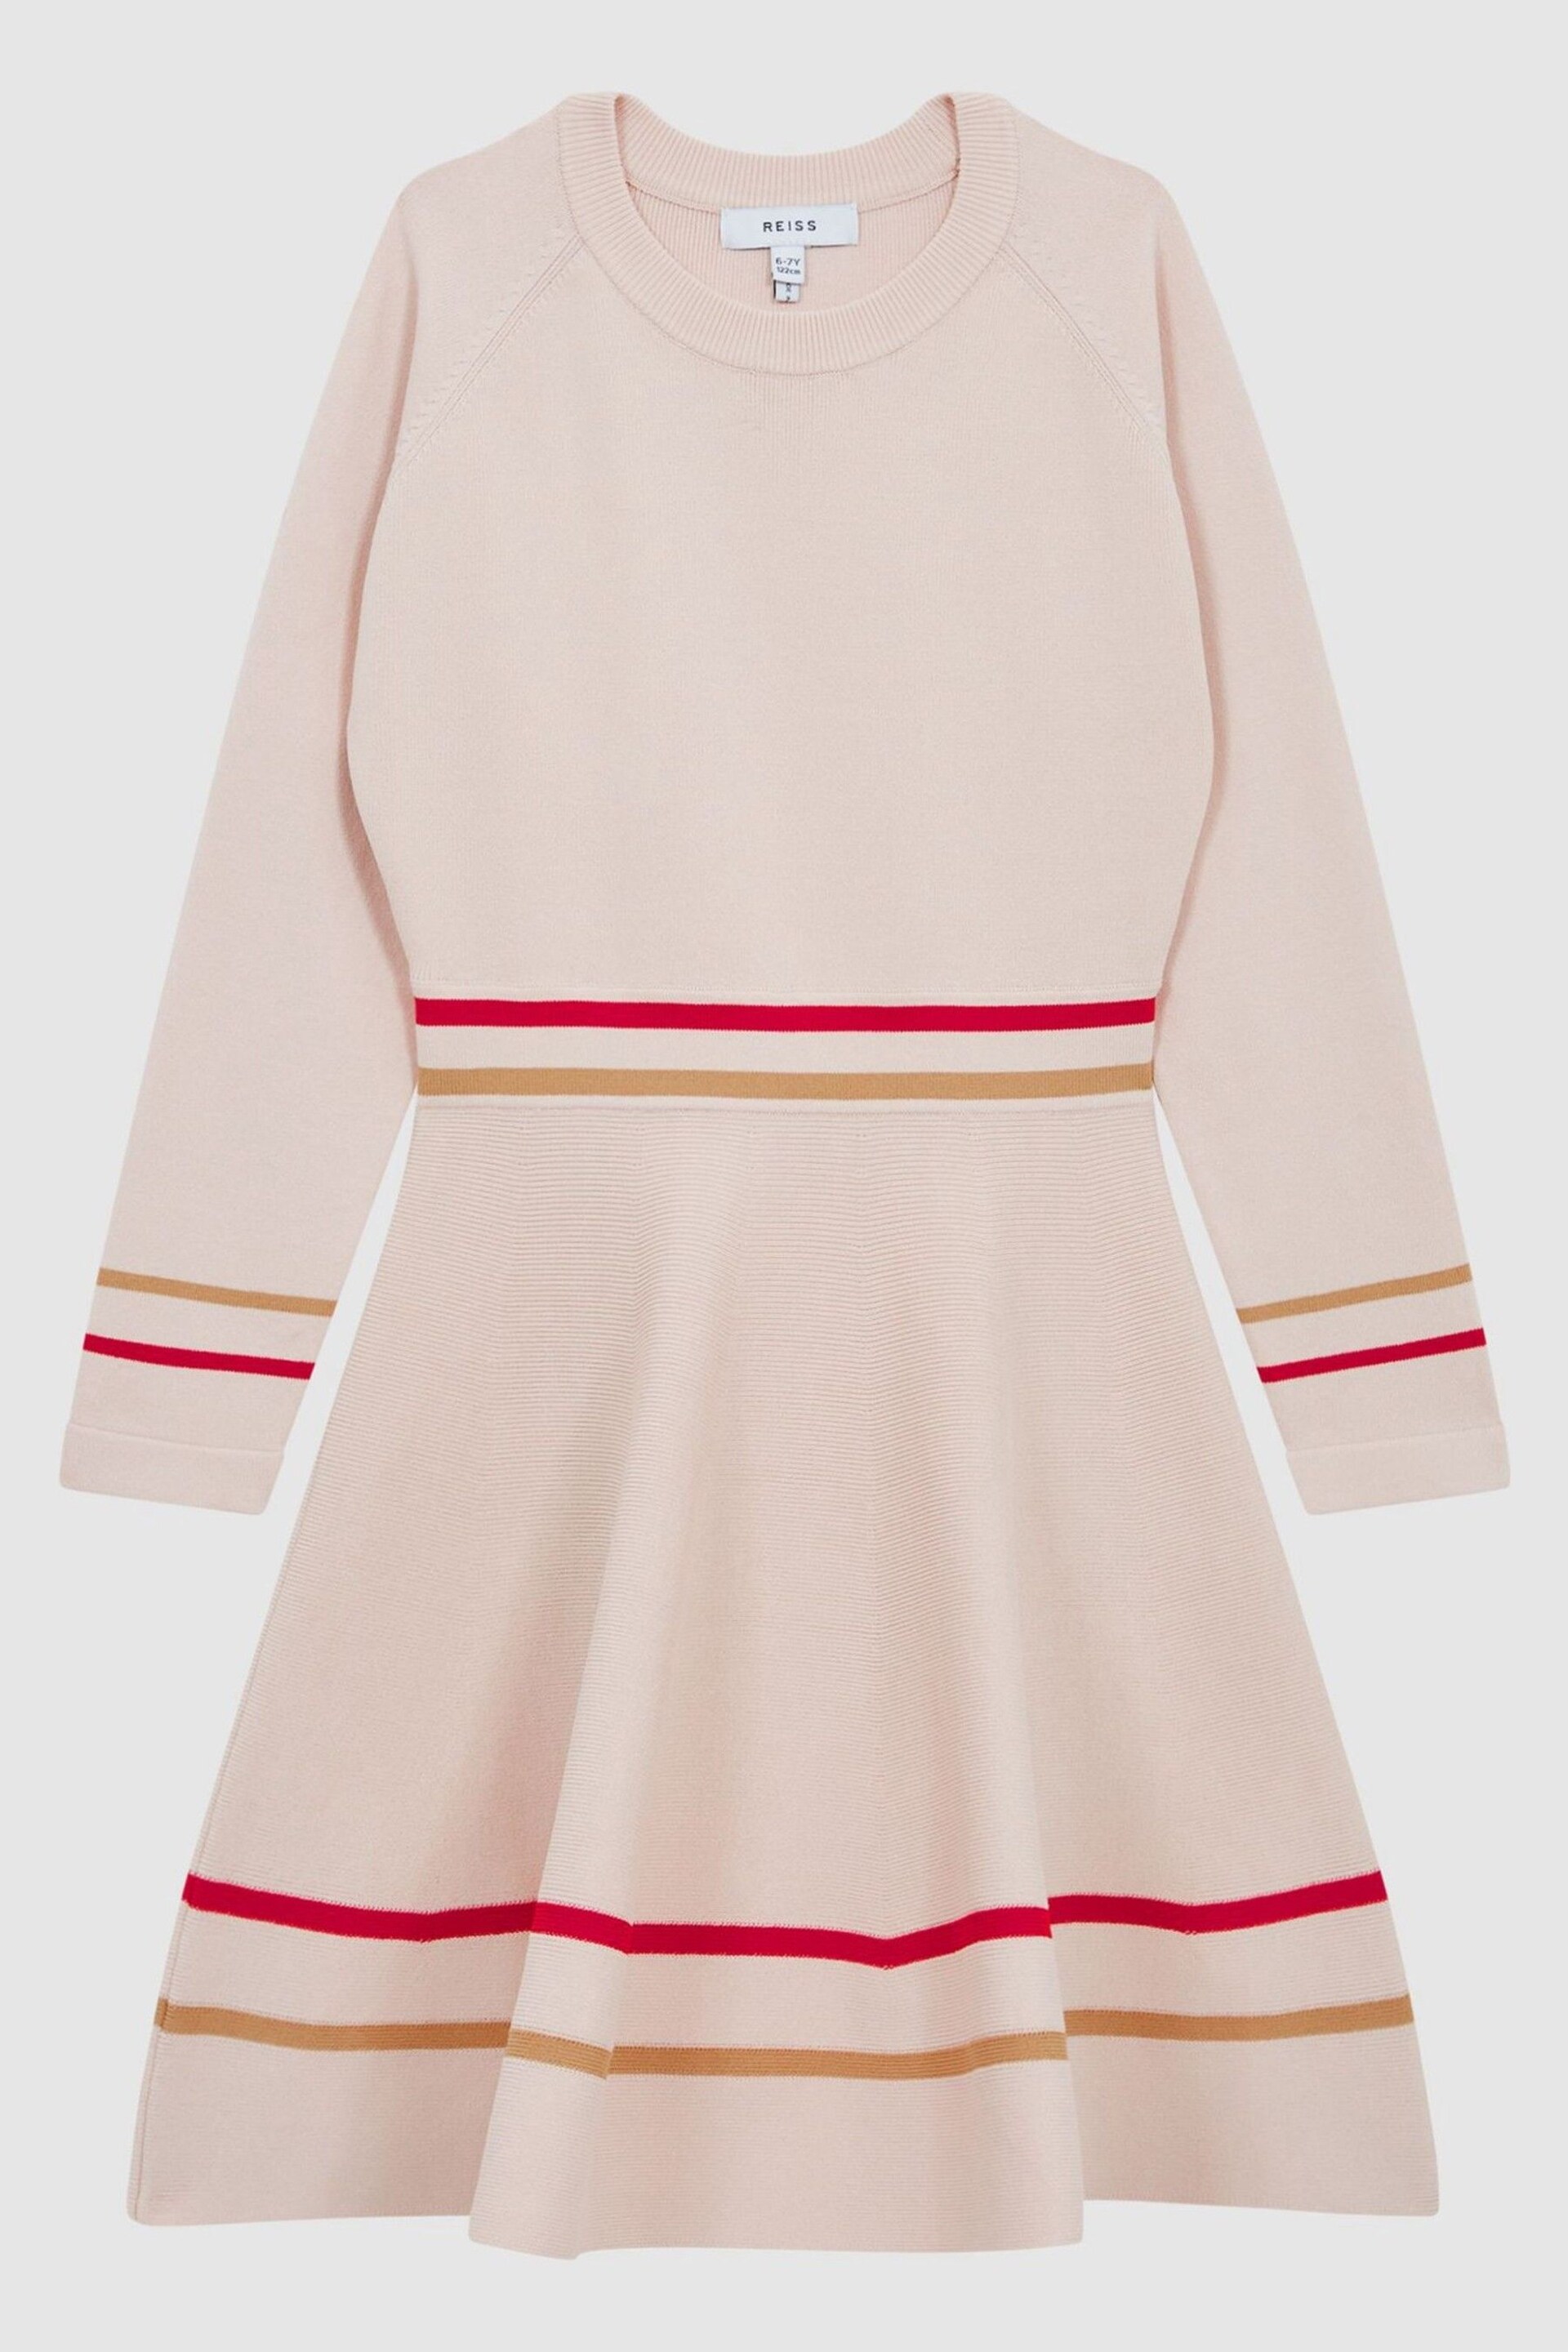 Reiss Pink Edith Junior Knitted Dress - Image 2 of 6